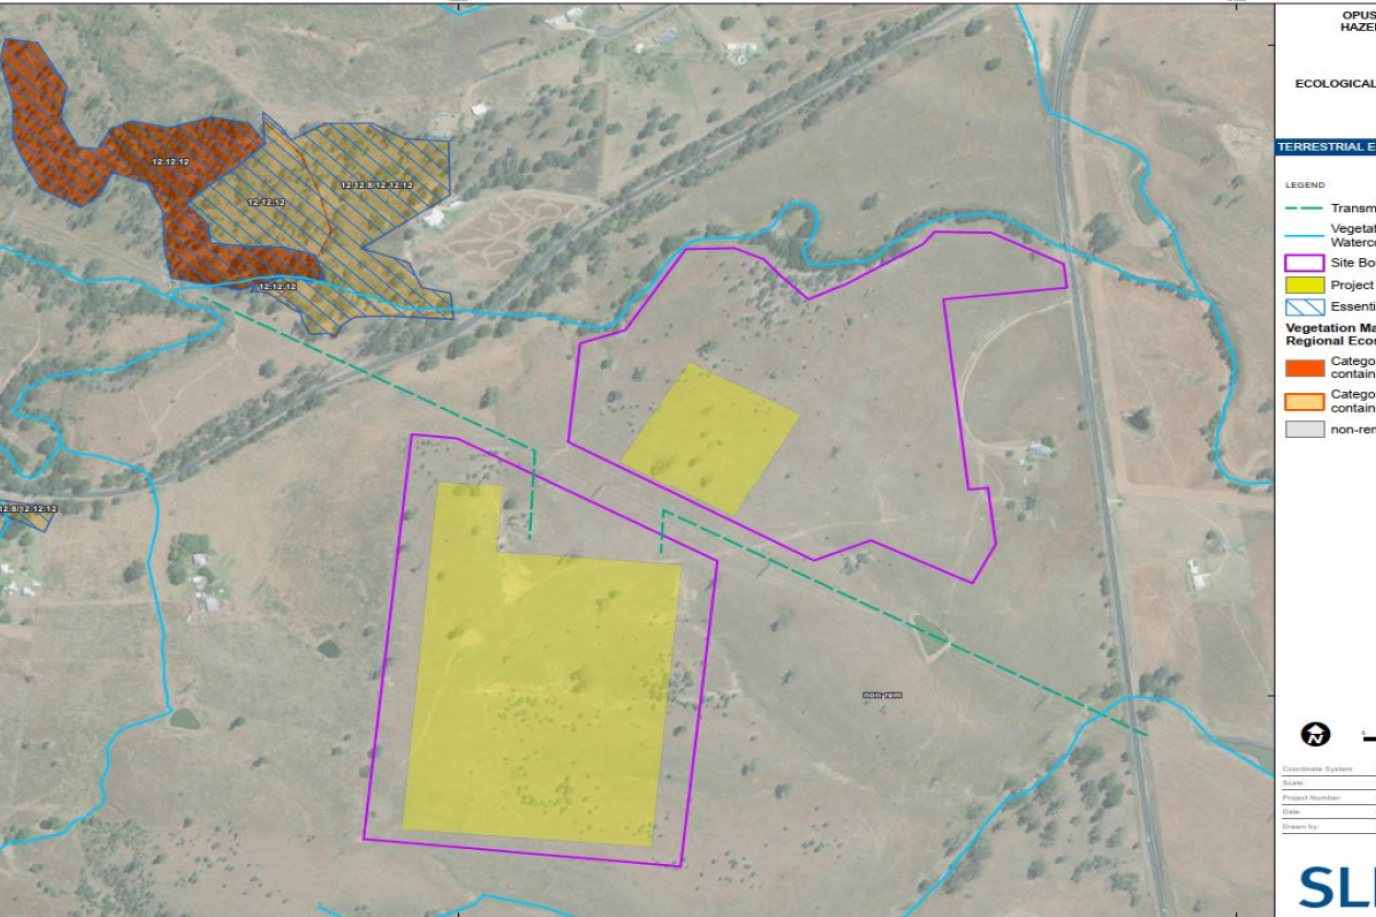 Map showing the proposed site next to waterways: Blue - Watercourse in the Higher Risk Catchment Area, Yellow - Project footprint, Purple - Site boundary, Green - Transmission line.